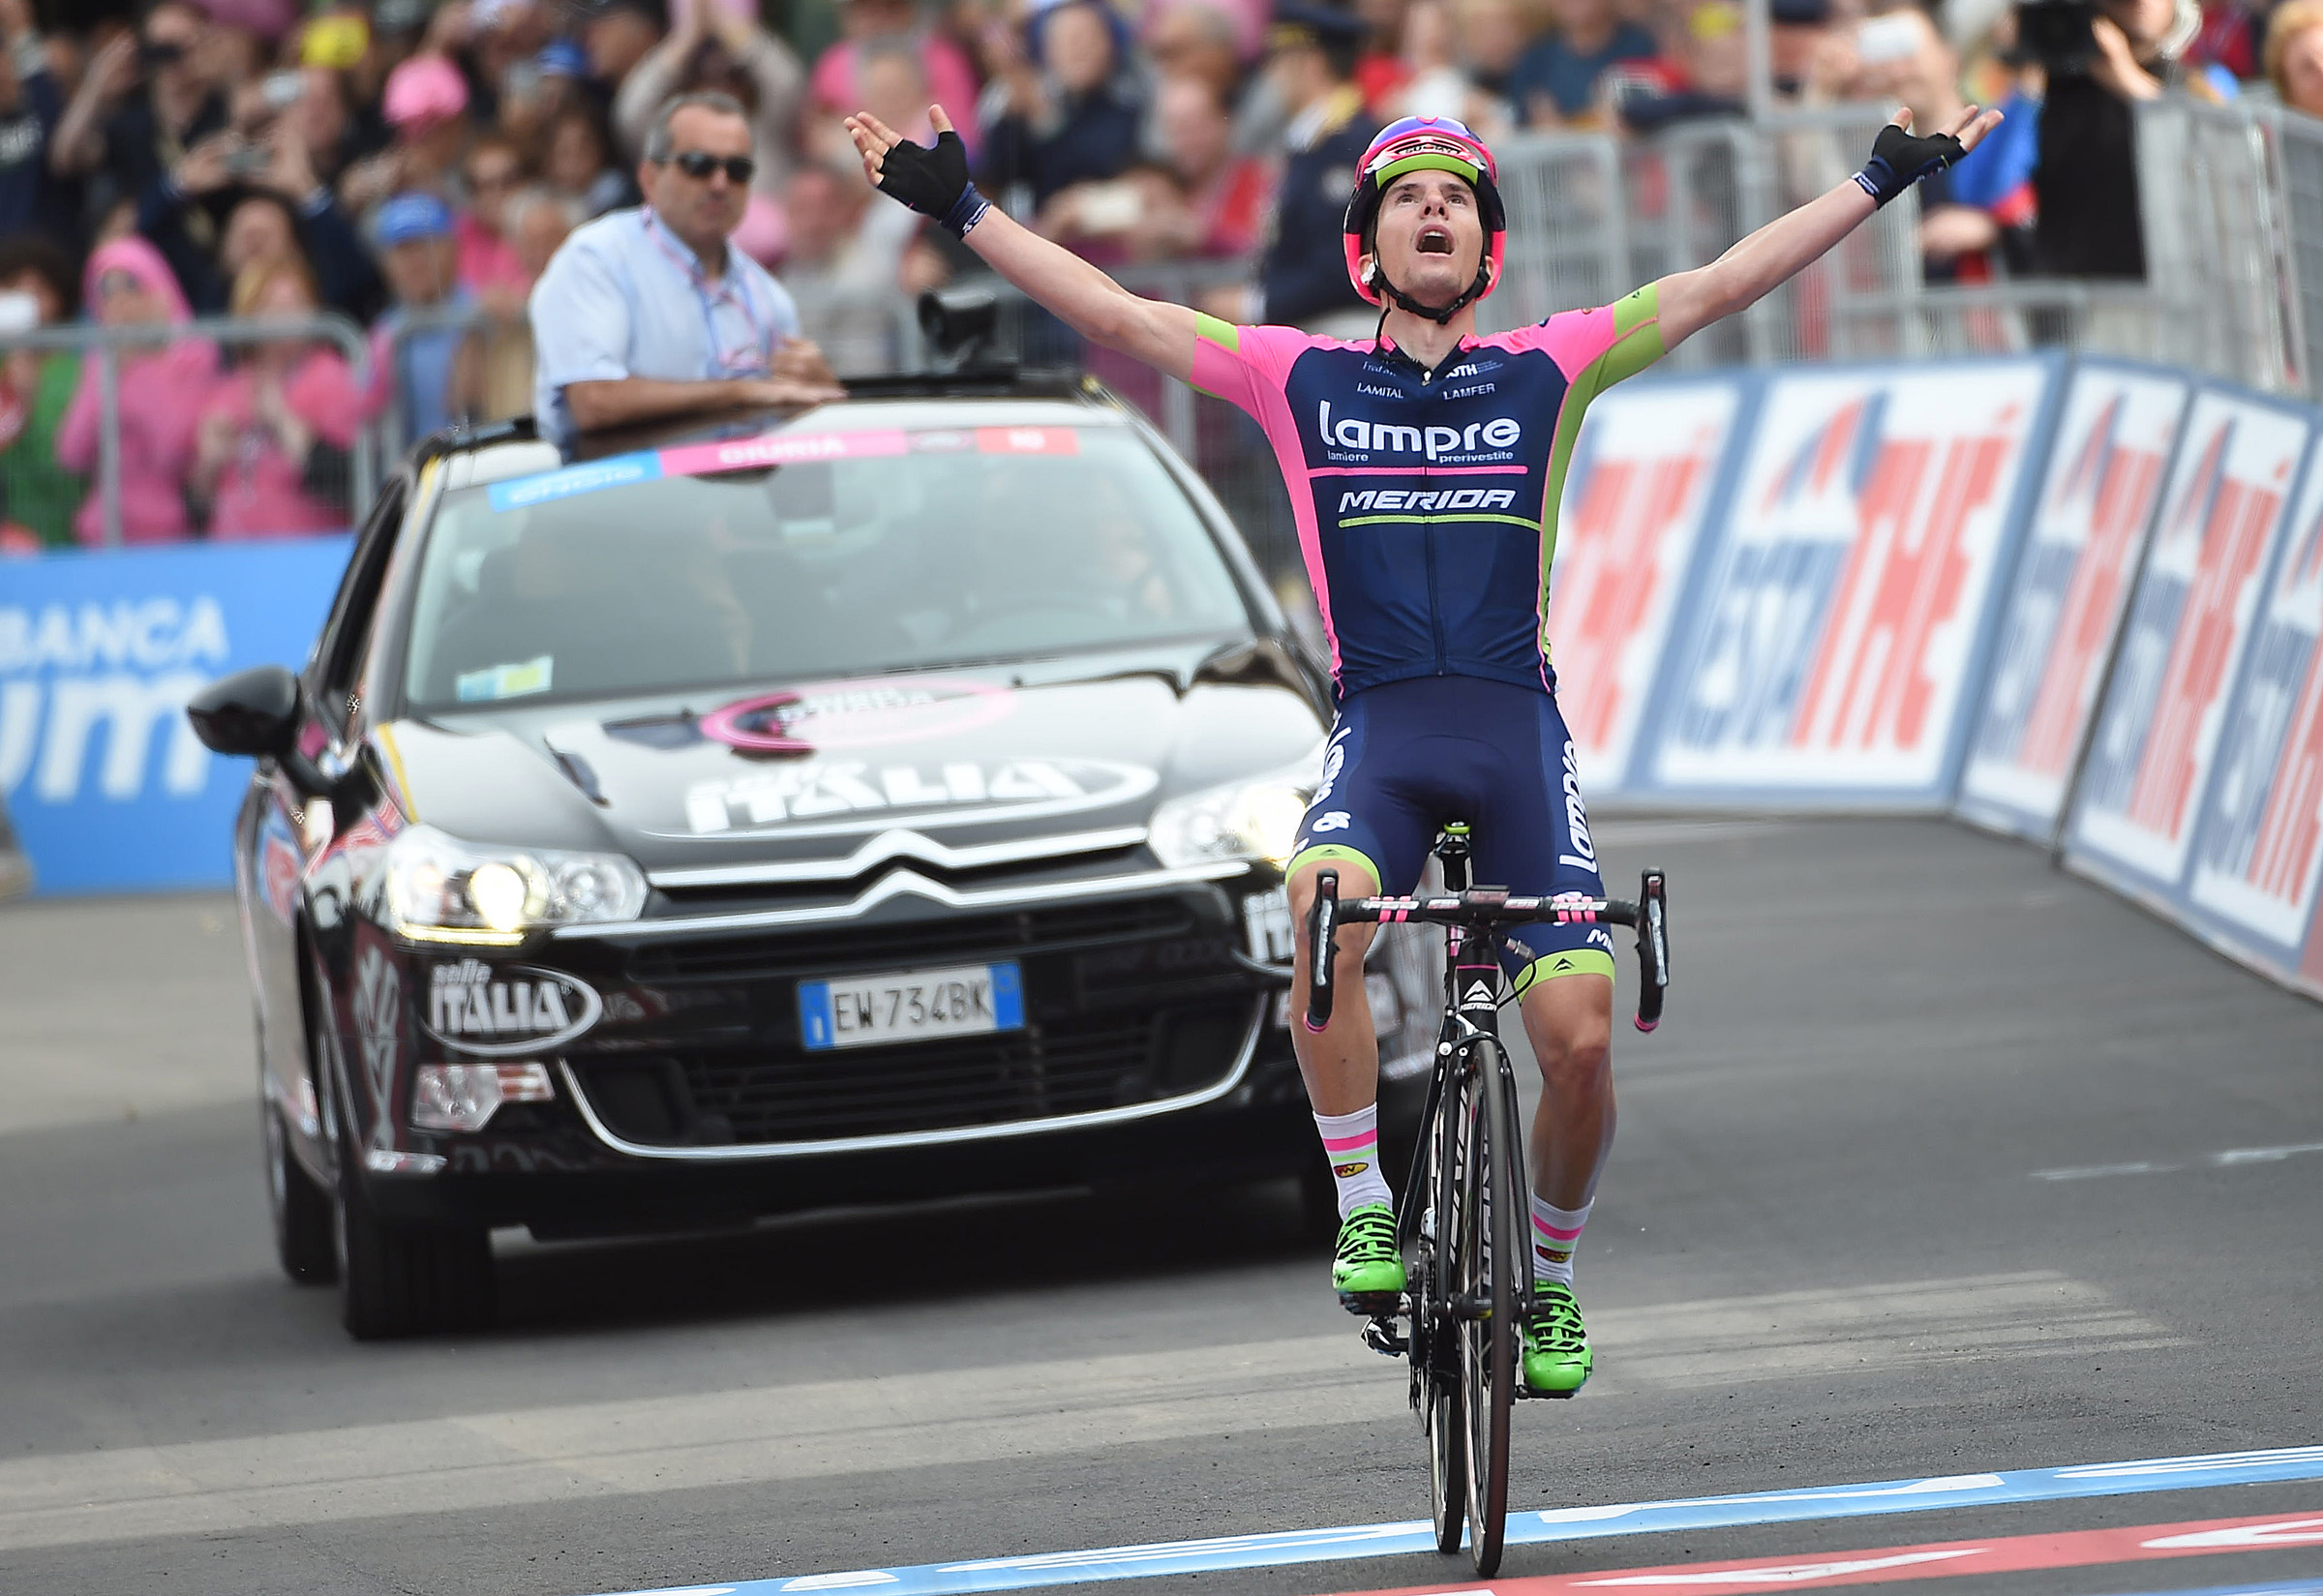 Slovenian rider  Jan Polanc of the  Lampre-Merida celebrate as he crosses the finish line to win the fifth stage of the 98th Giro d'Italia cycling tour over 152km from La Spezia to Abetone, Italy, 13 May 2015. ANSA/DANIEL DAL ZENNARO